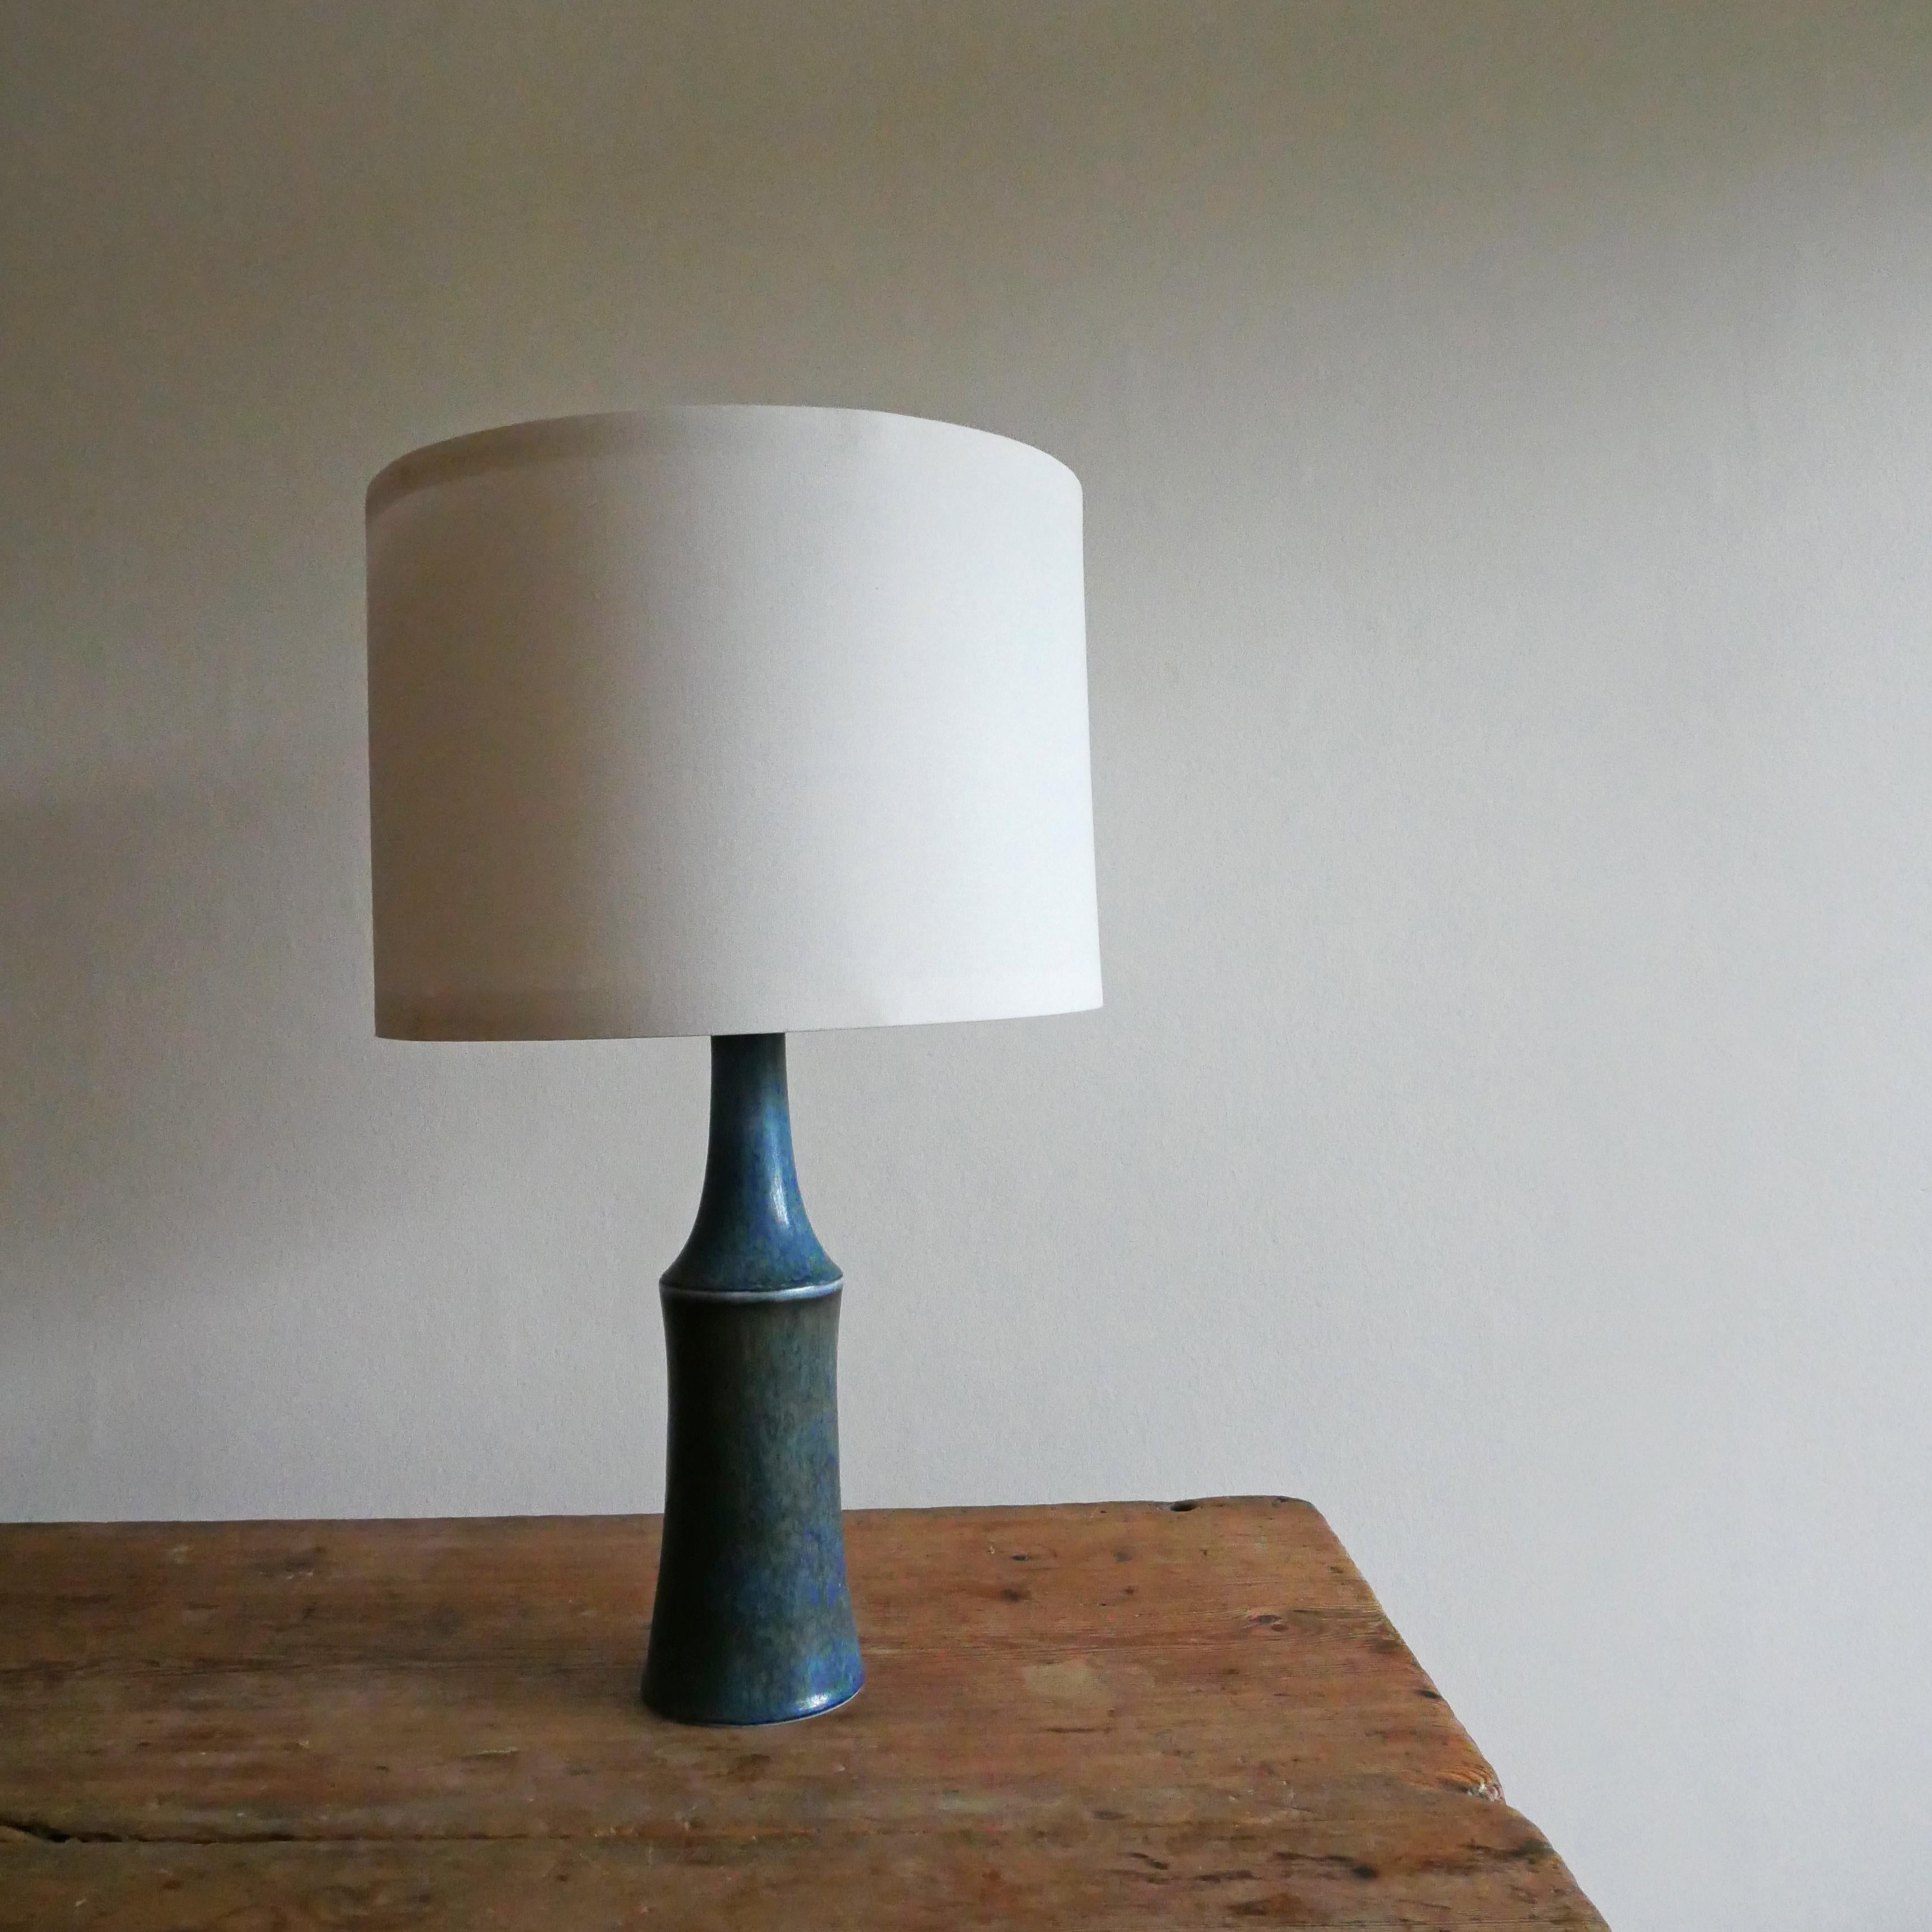 One table lamp made by Carl-Harry Stålhane for the iconic Swedish, Rörstrand. Features highly artistic blue glaze with a touch of green tones.


Height: 30 cm
Diameter:  10 cm
Height includes socket: 35 cm

Do not includes lampshades.

